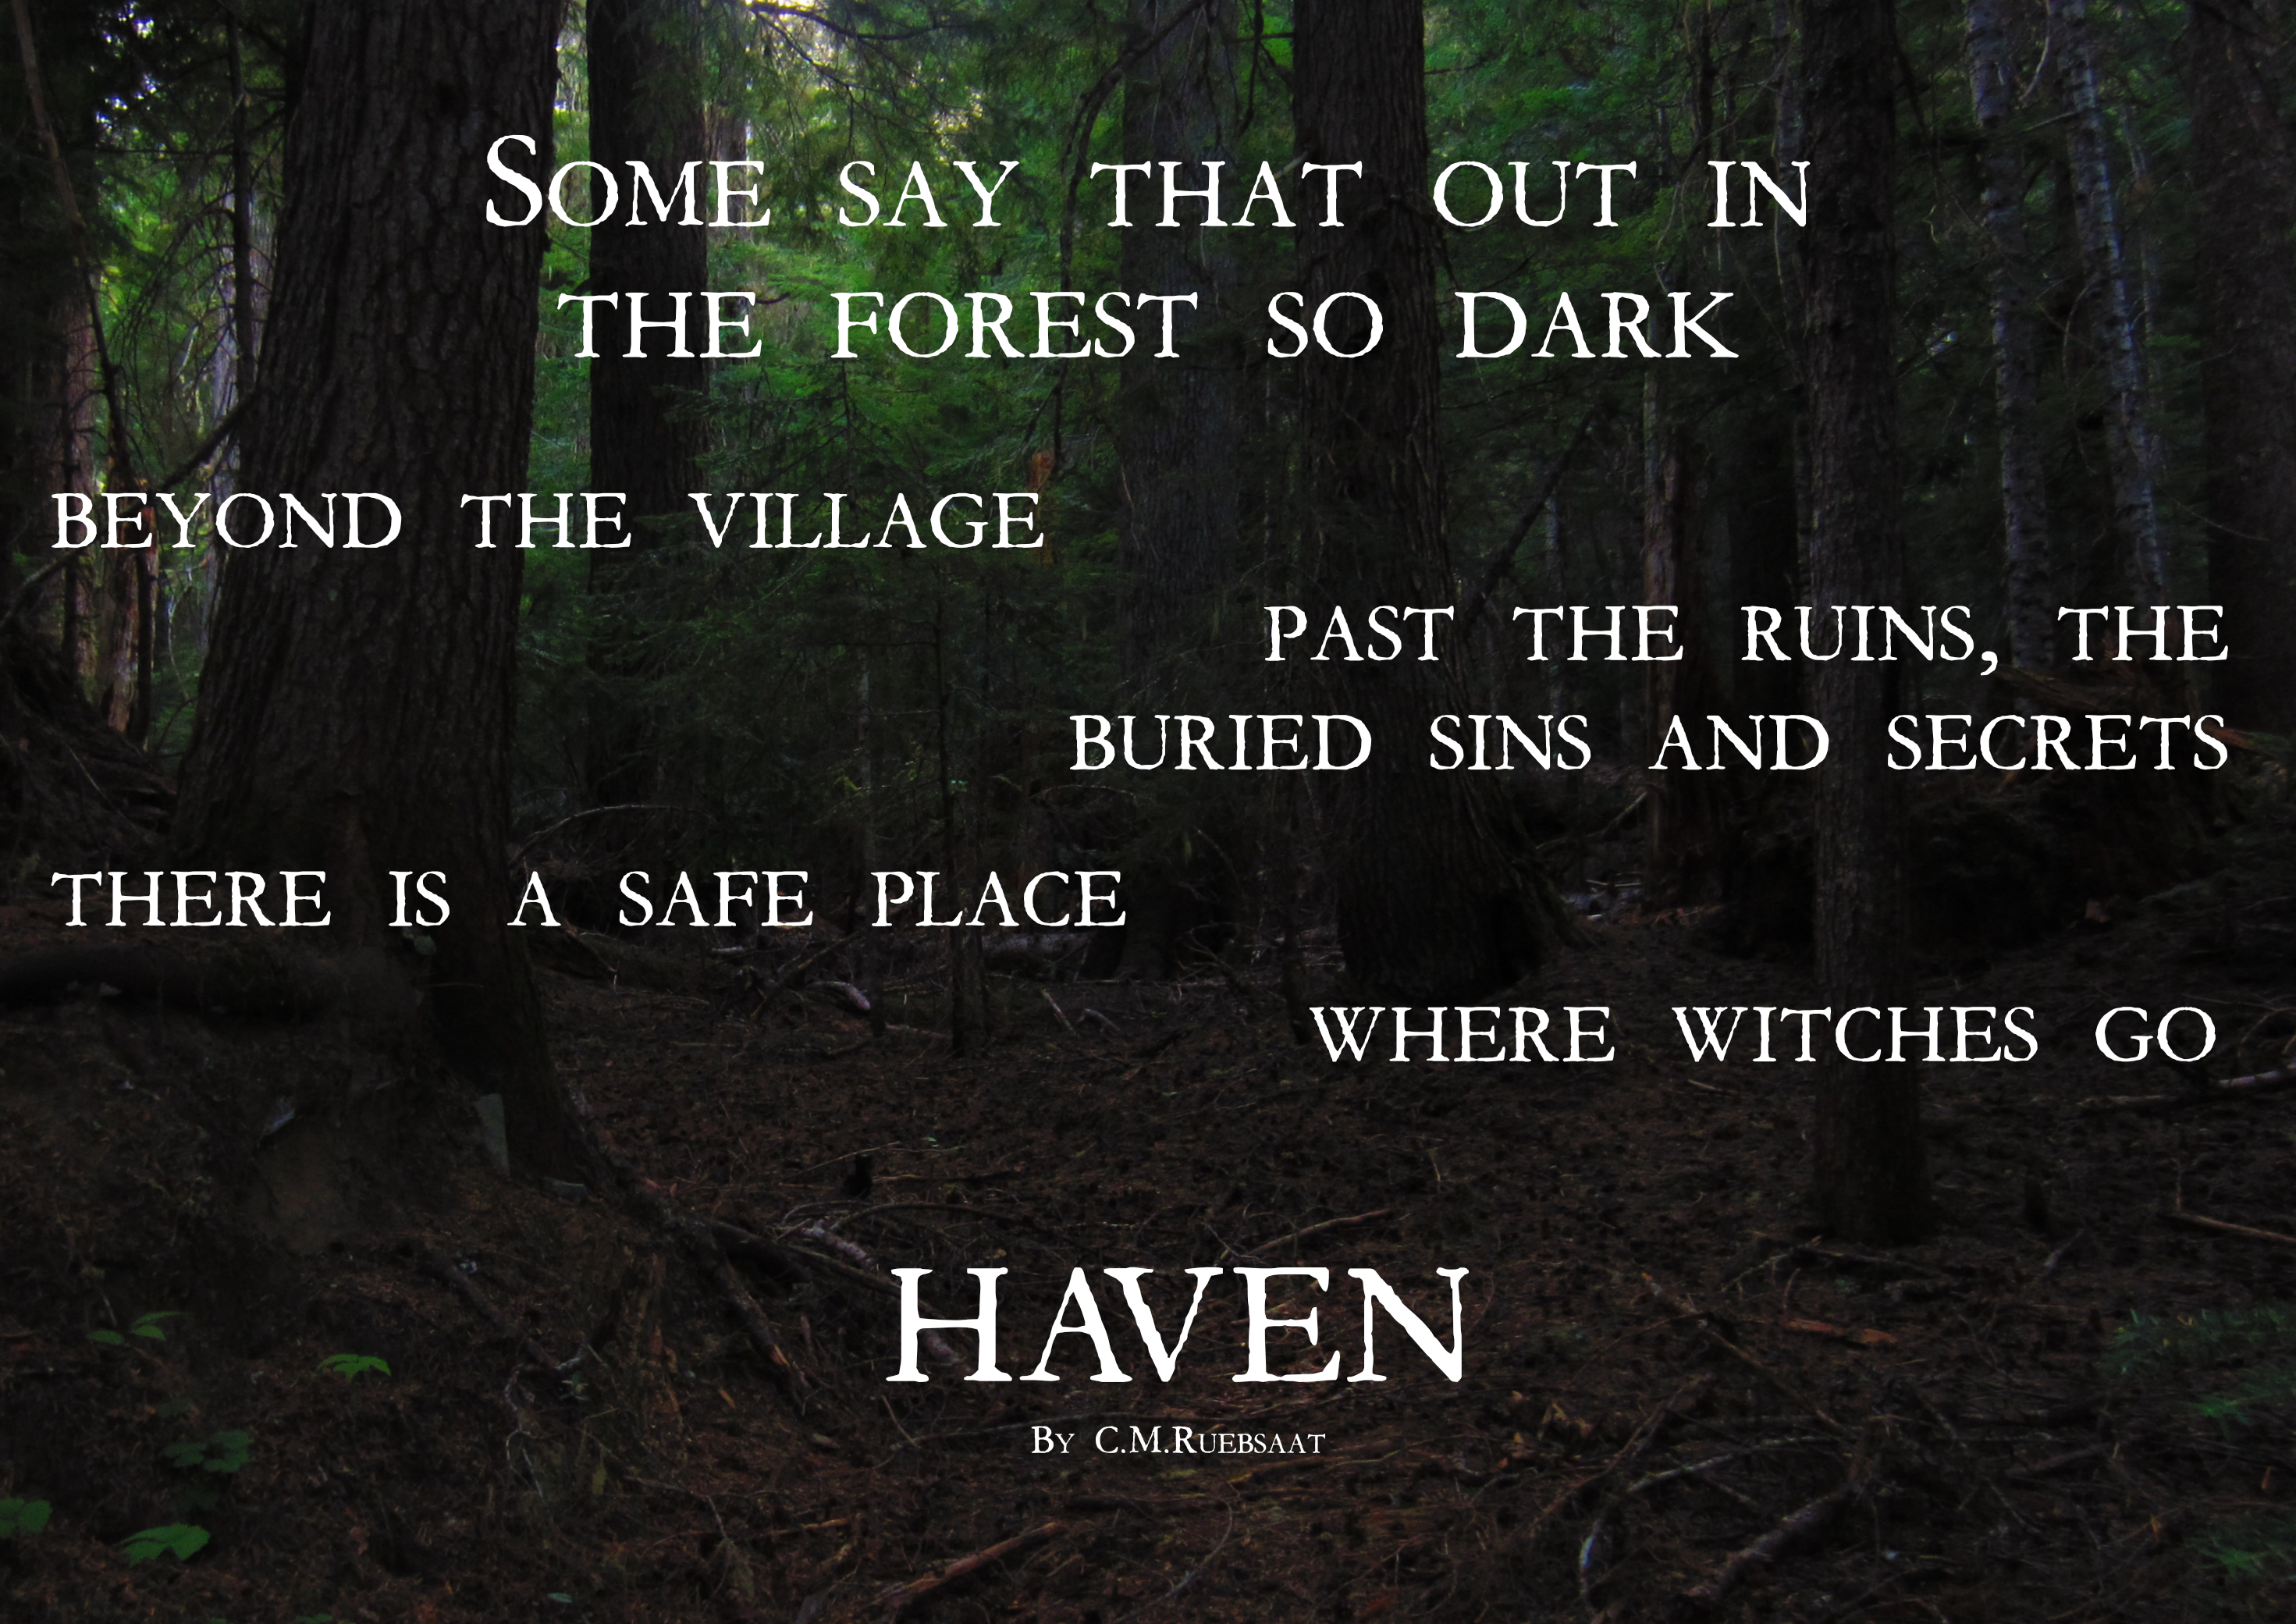 HAVEN: a Game of Witches